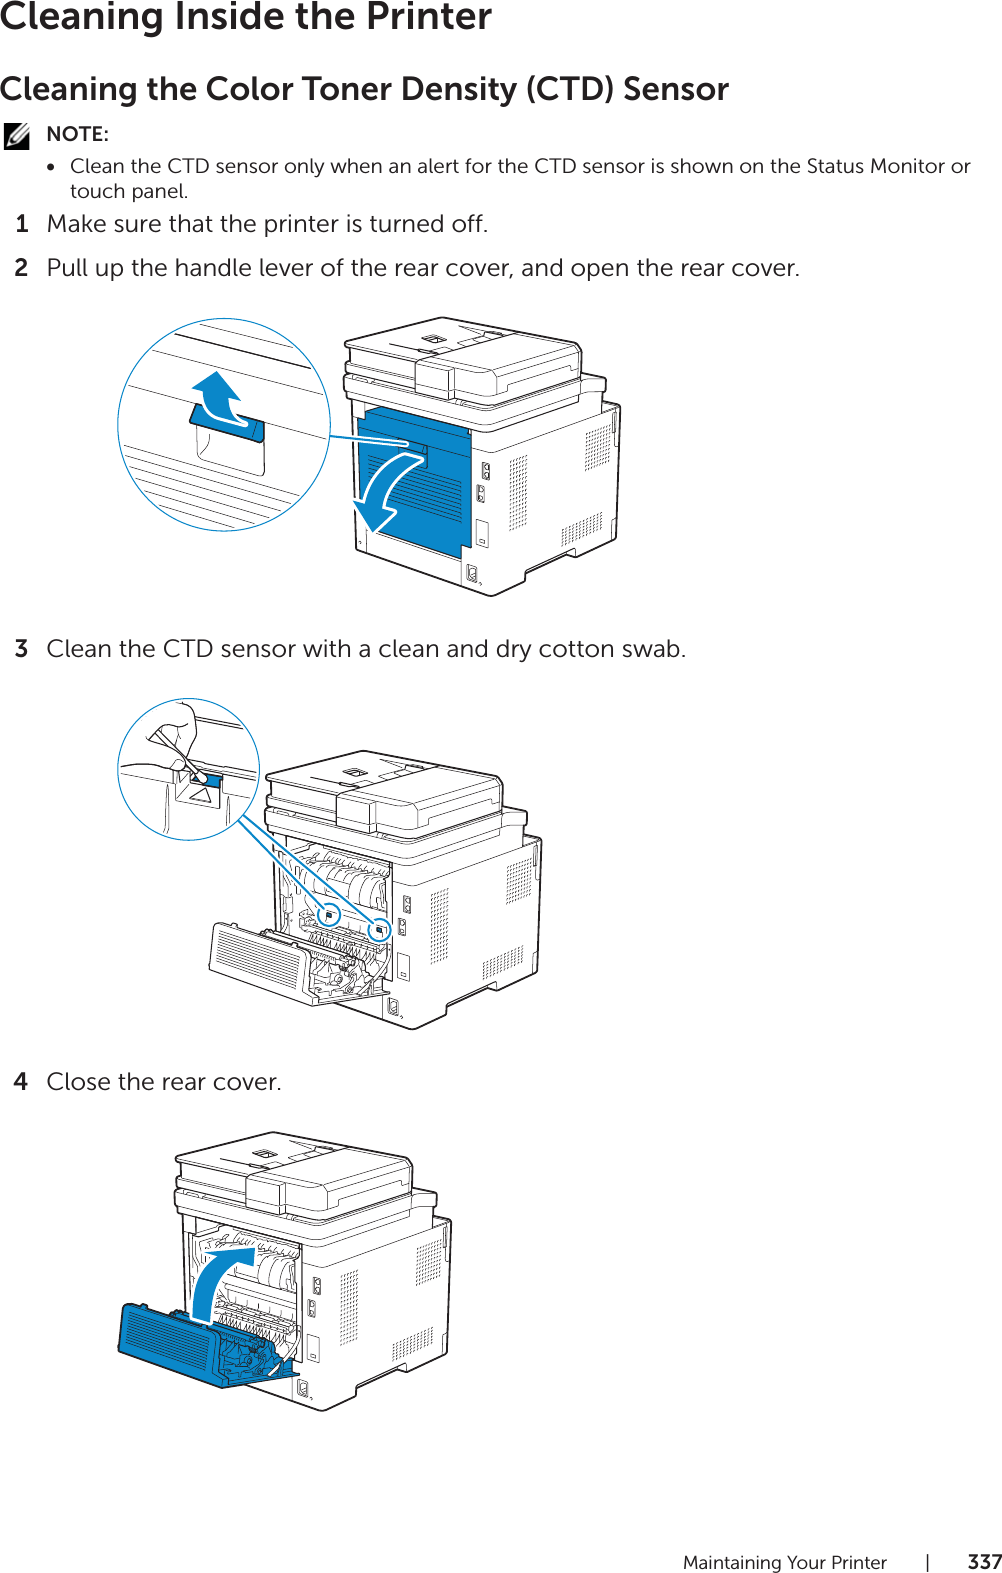 Maintaining Your Printer |337Cleaning Inside the PrinterCleaning the Color Toner Density (CTD) SensorNOTE:•Clean the CTD sensor only when an alert for the CTD sensor is shown on the Status Monitor or touch panel.1Make sure that the printer is turned off.2Pull up the handle lever of the rear cover, and open the rear cover.3Clean the CTD sensor with a clean and dry cotton swab.4Close the rear cover.